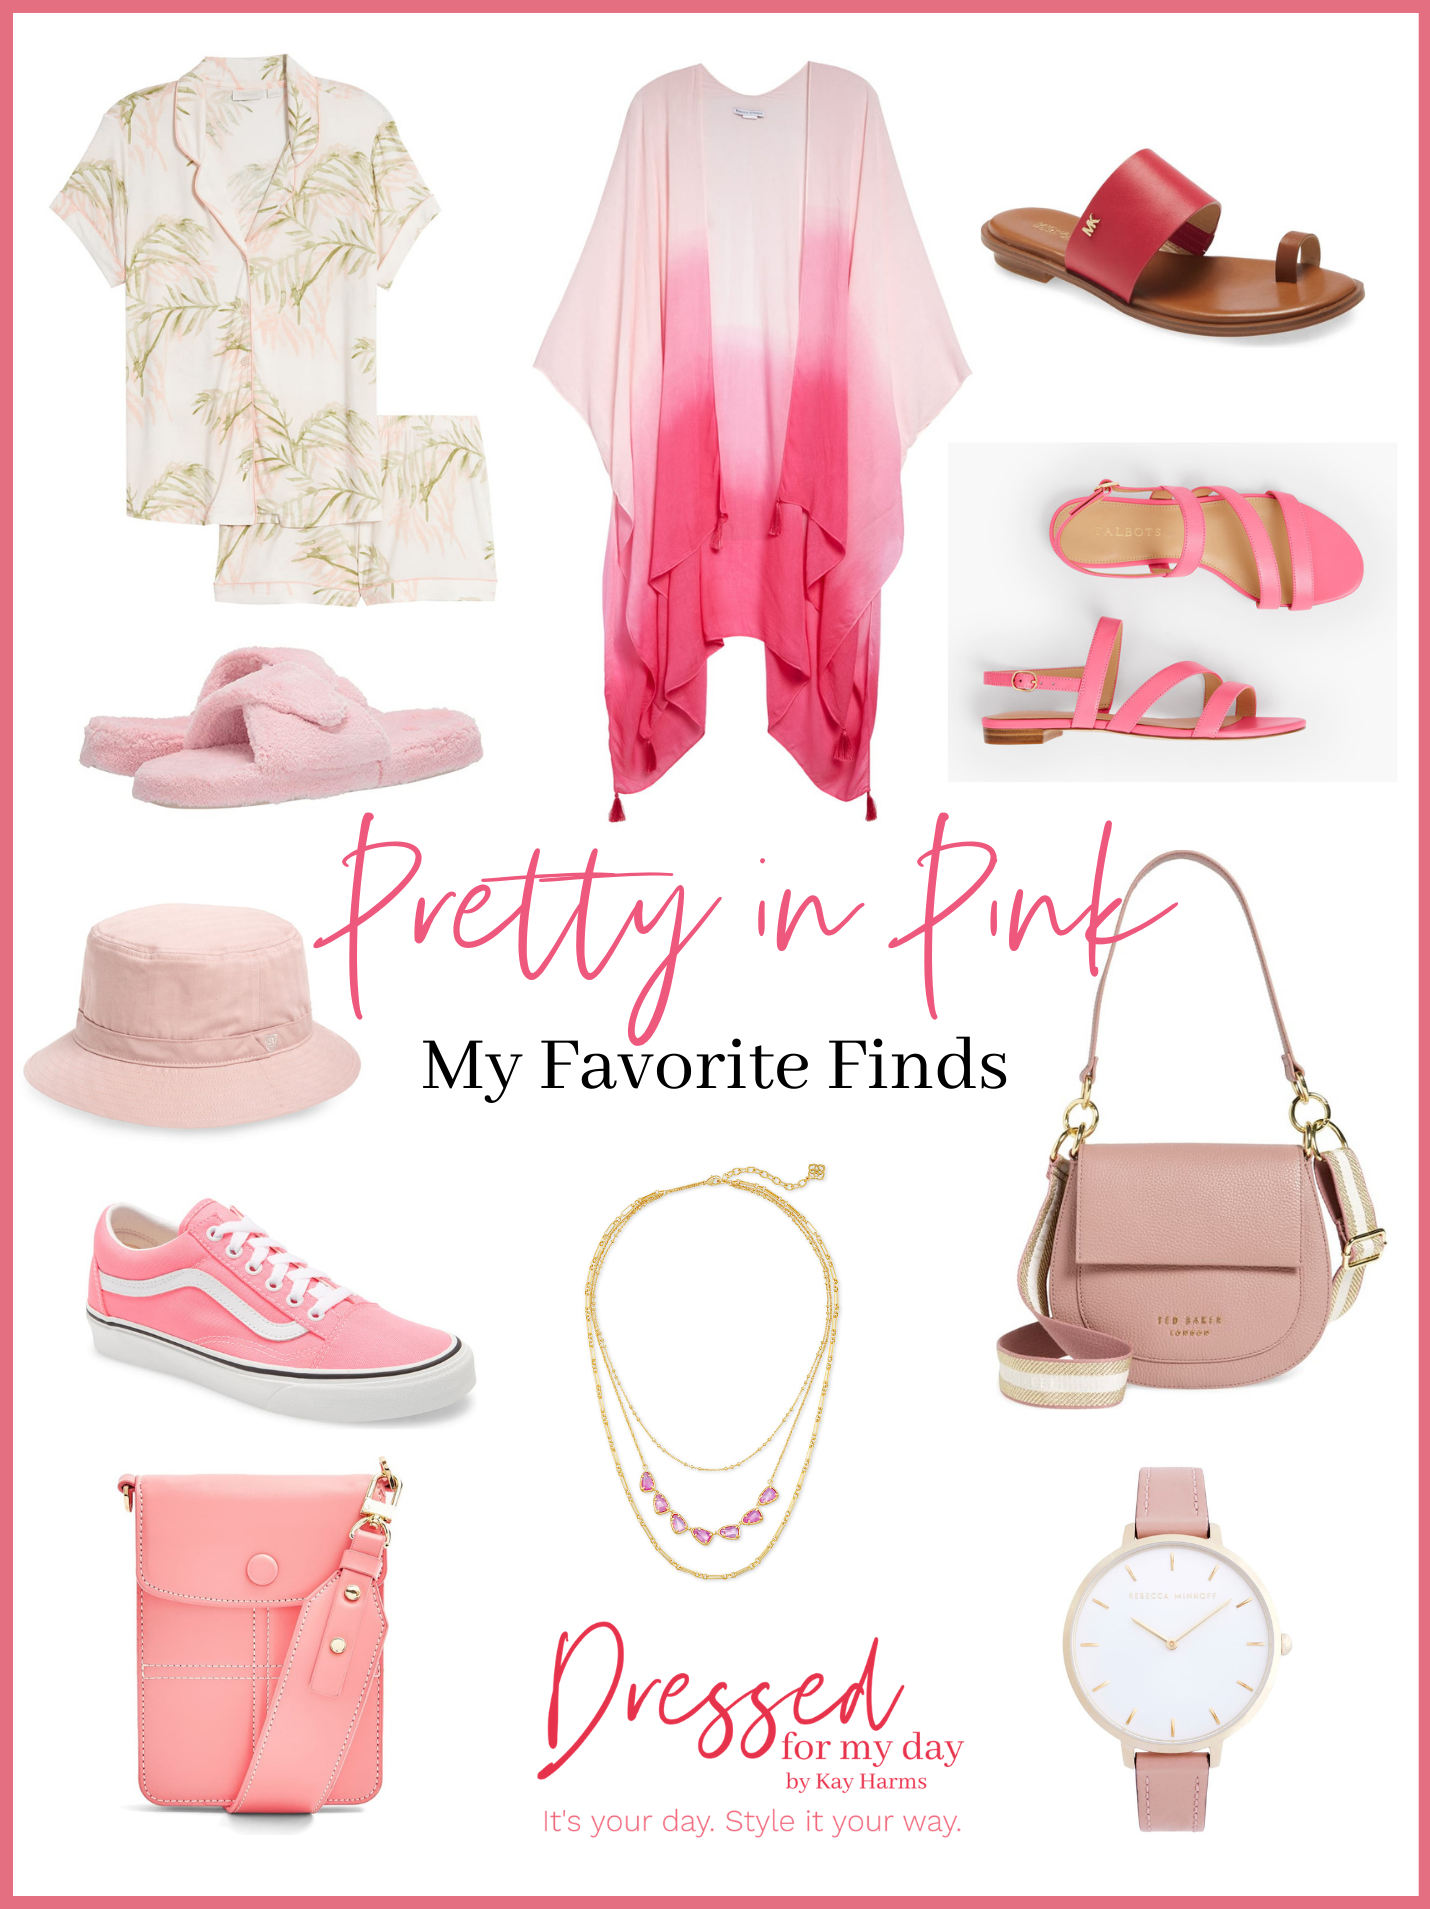 Pretty Pink - My Favorite Finds